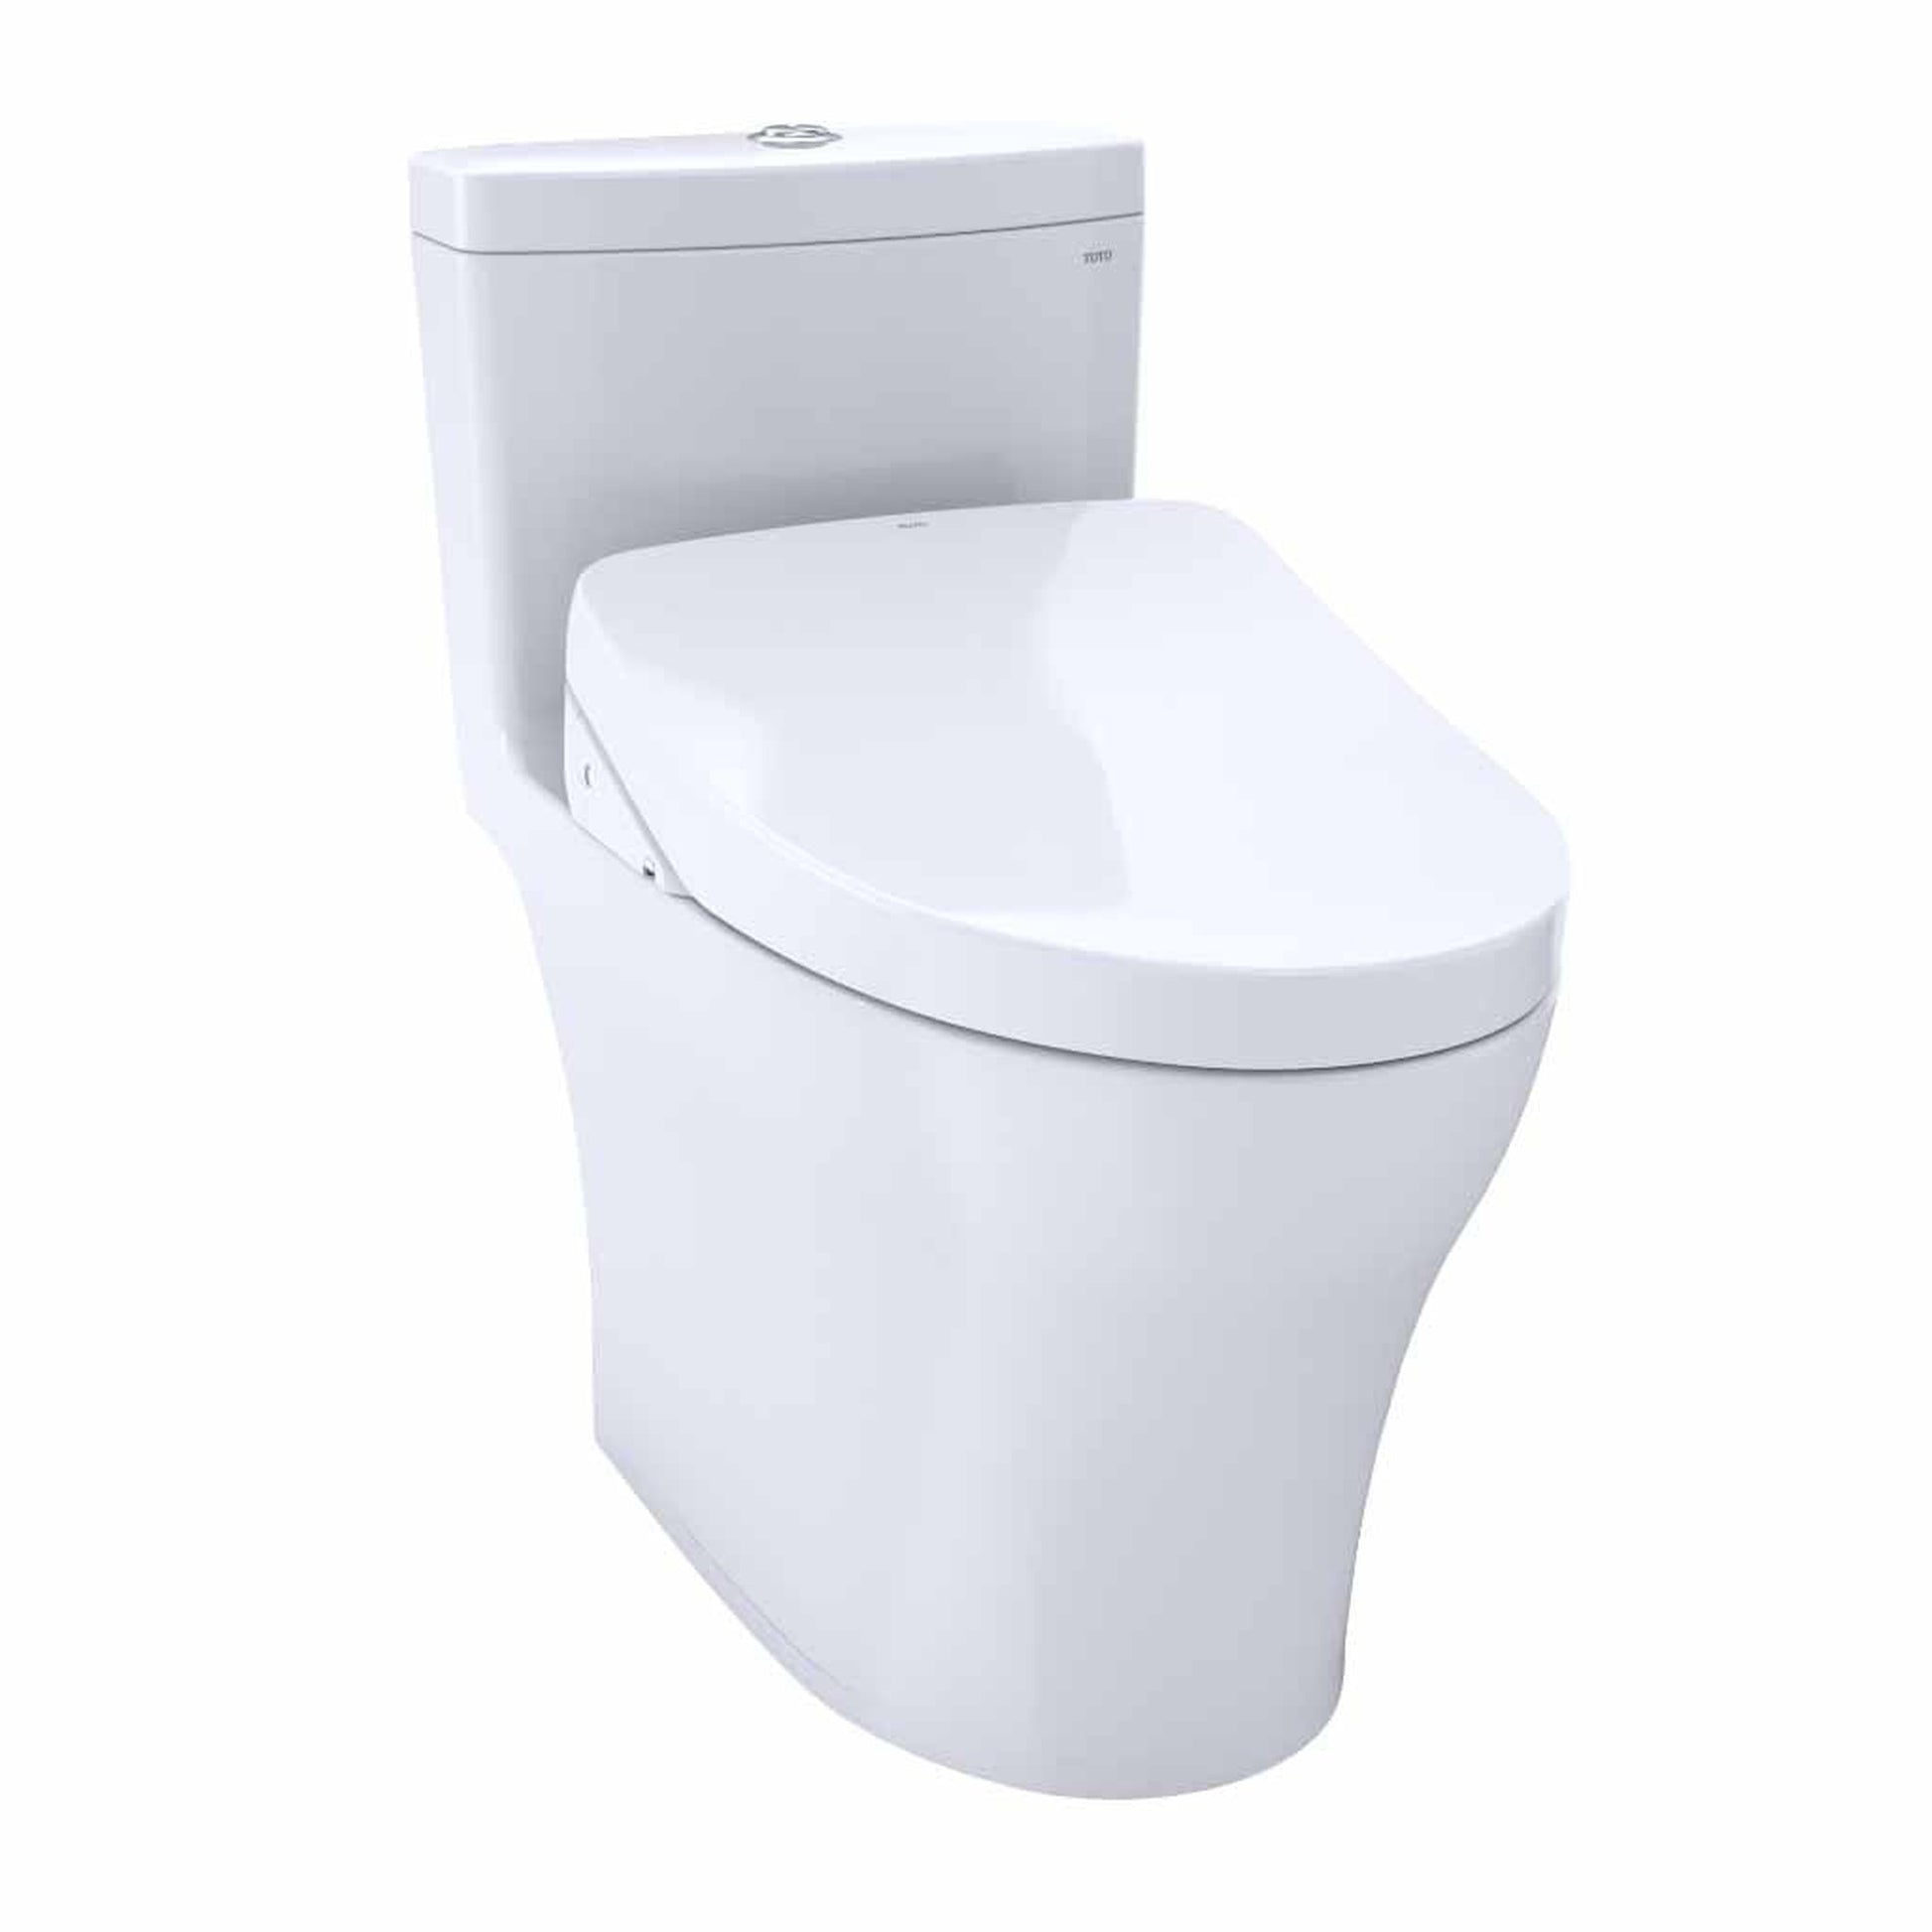 Hawaii's Top Toilet Clog Plumber - Fast & Reliable Solutions